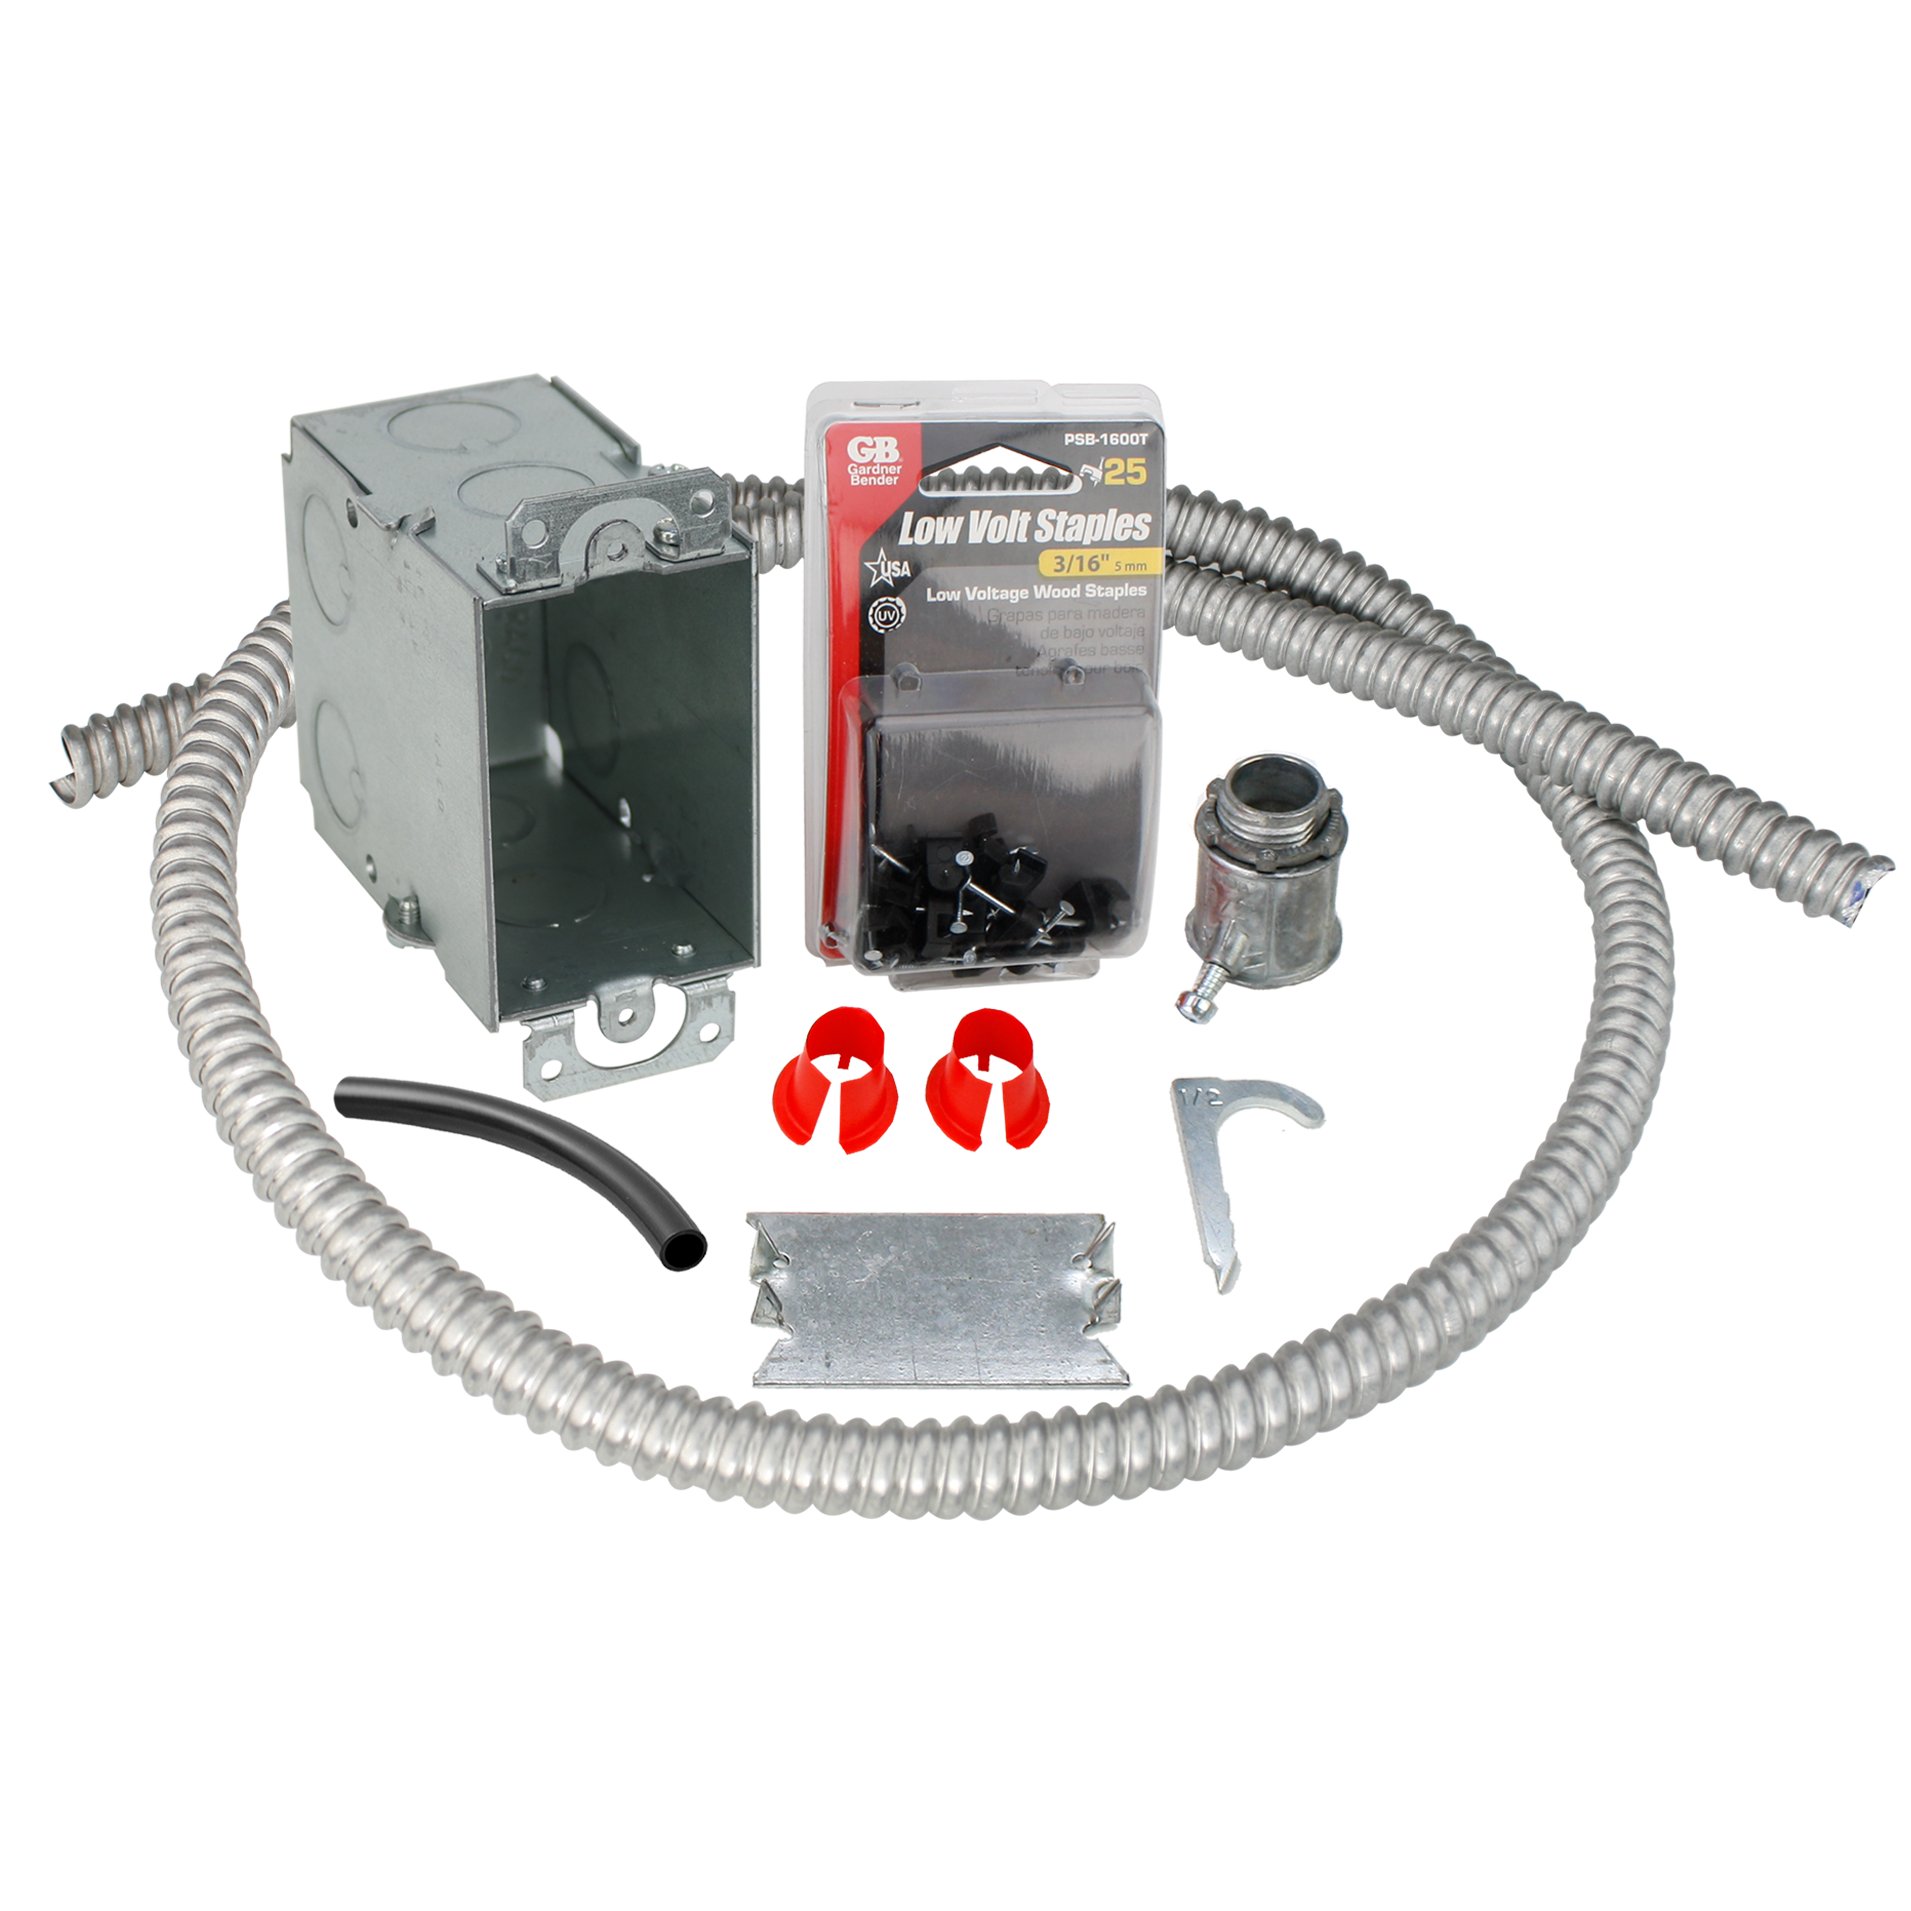 Electrical Rough-in Kit Single Gang Box with Single Conduit